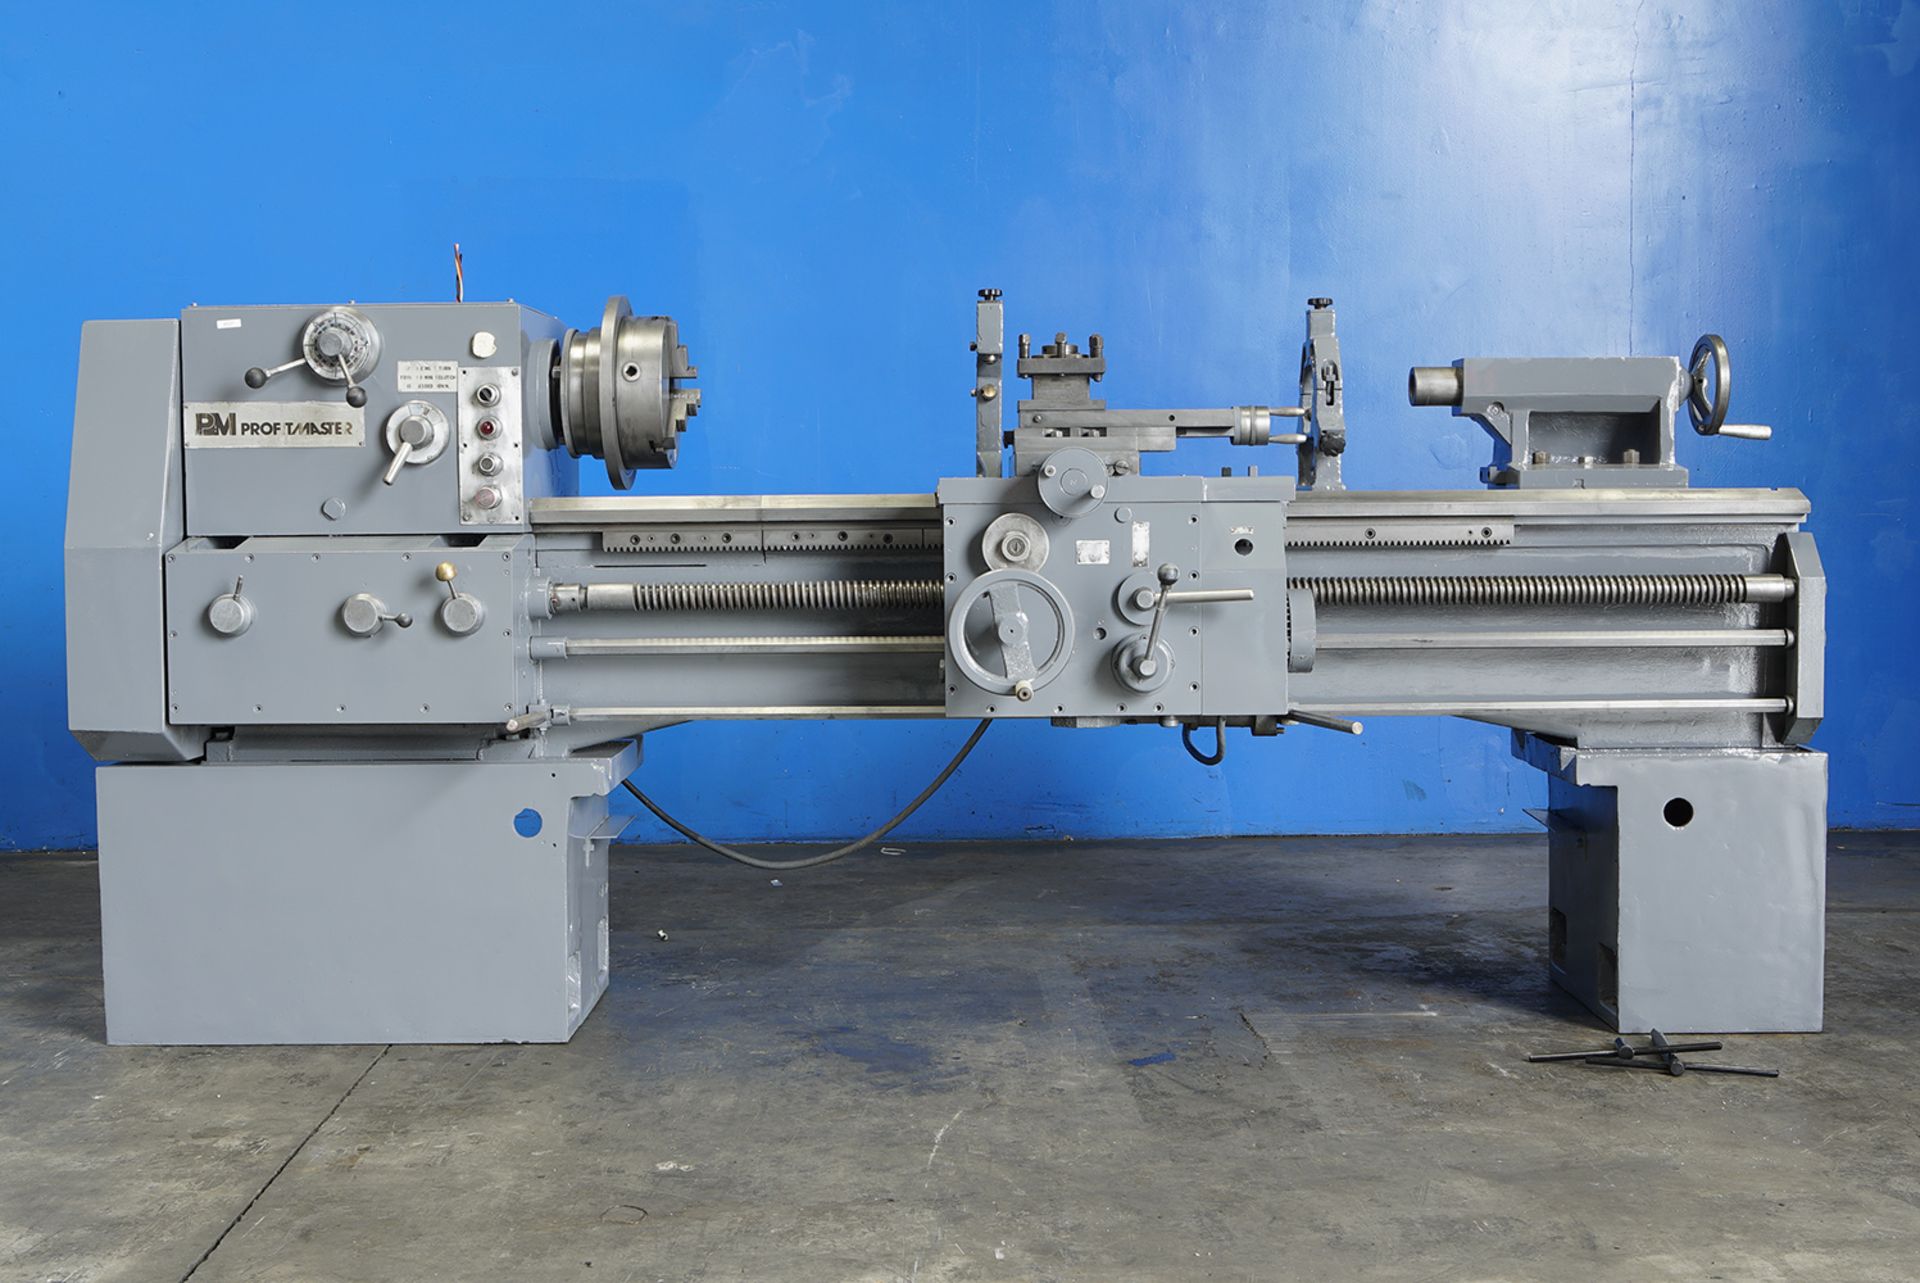 Profitmaster CY400M x 1500 Lathe, 16”/24” x 60”, 3-Jaw, Steady and Follow Rest (4537)